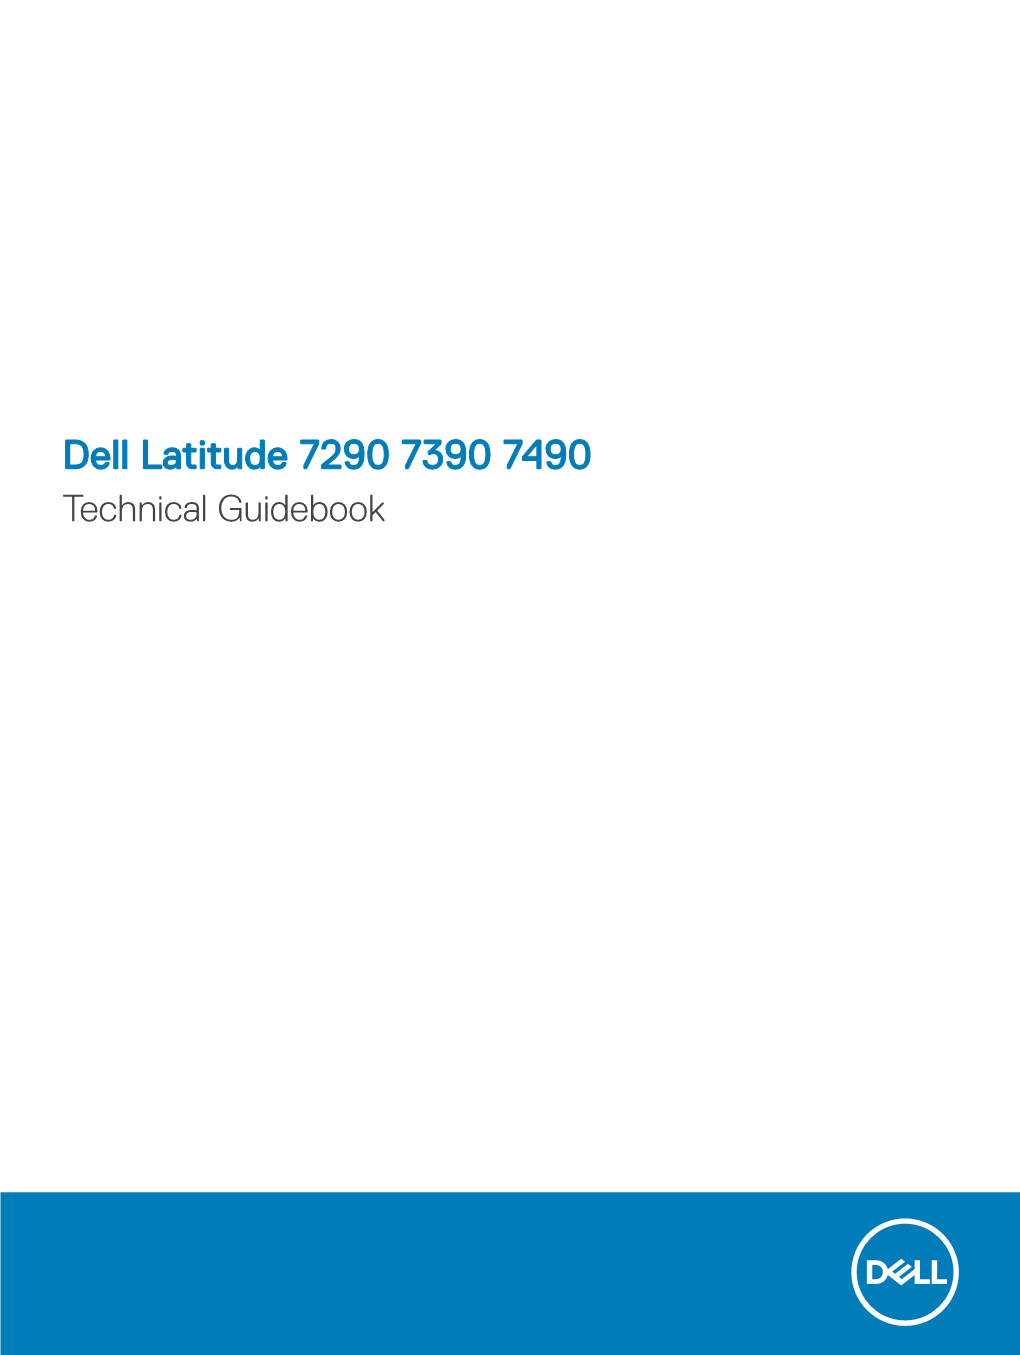 Dell Latitude 7290 7390 7490 Technical Guidebook Notes, Cautions, and Warnings